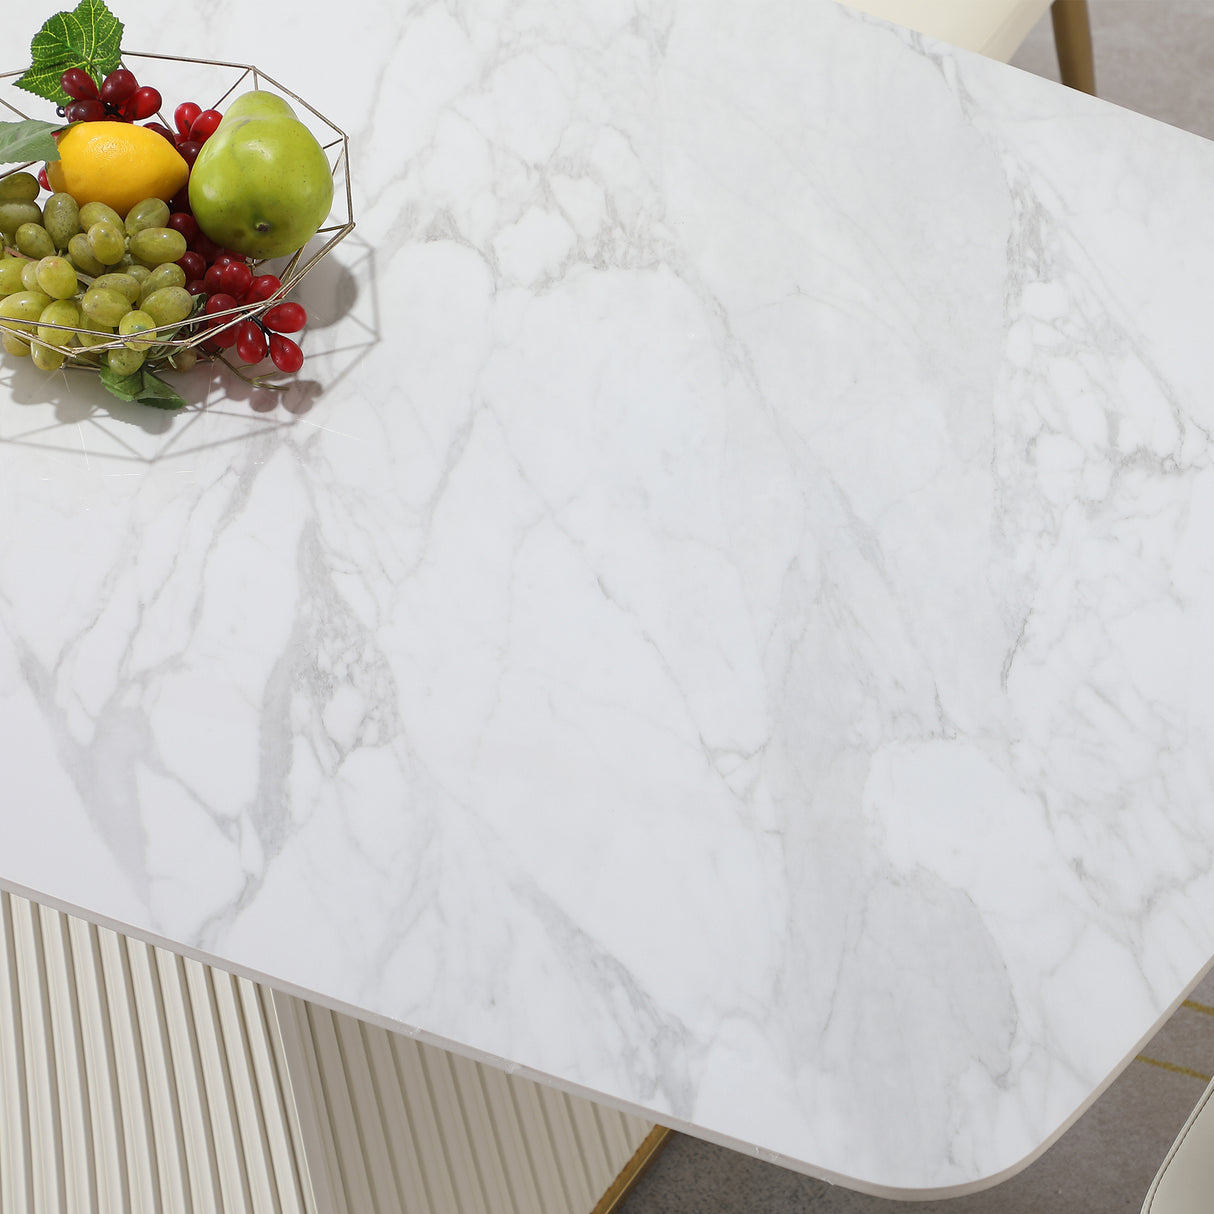 71-Inch Stone DiningTable with Carrara White color and Striped Pedestal Base - Home Elegance USA